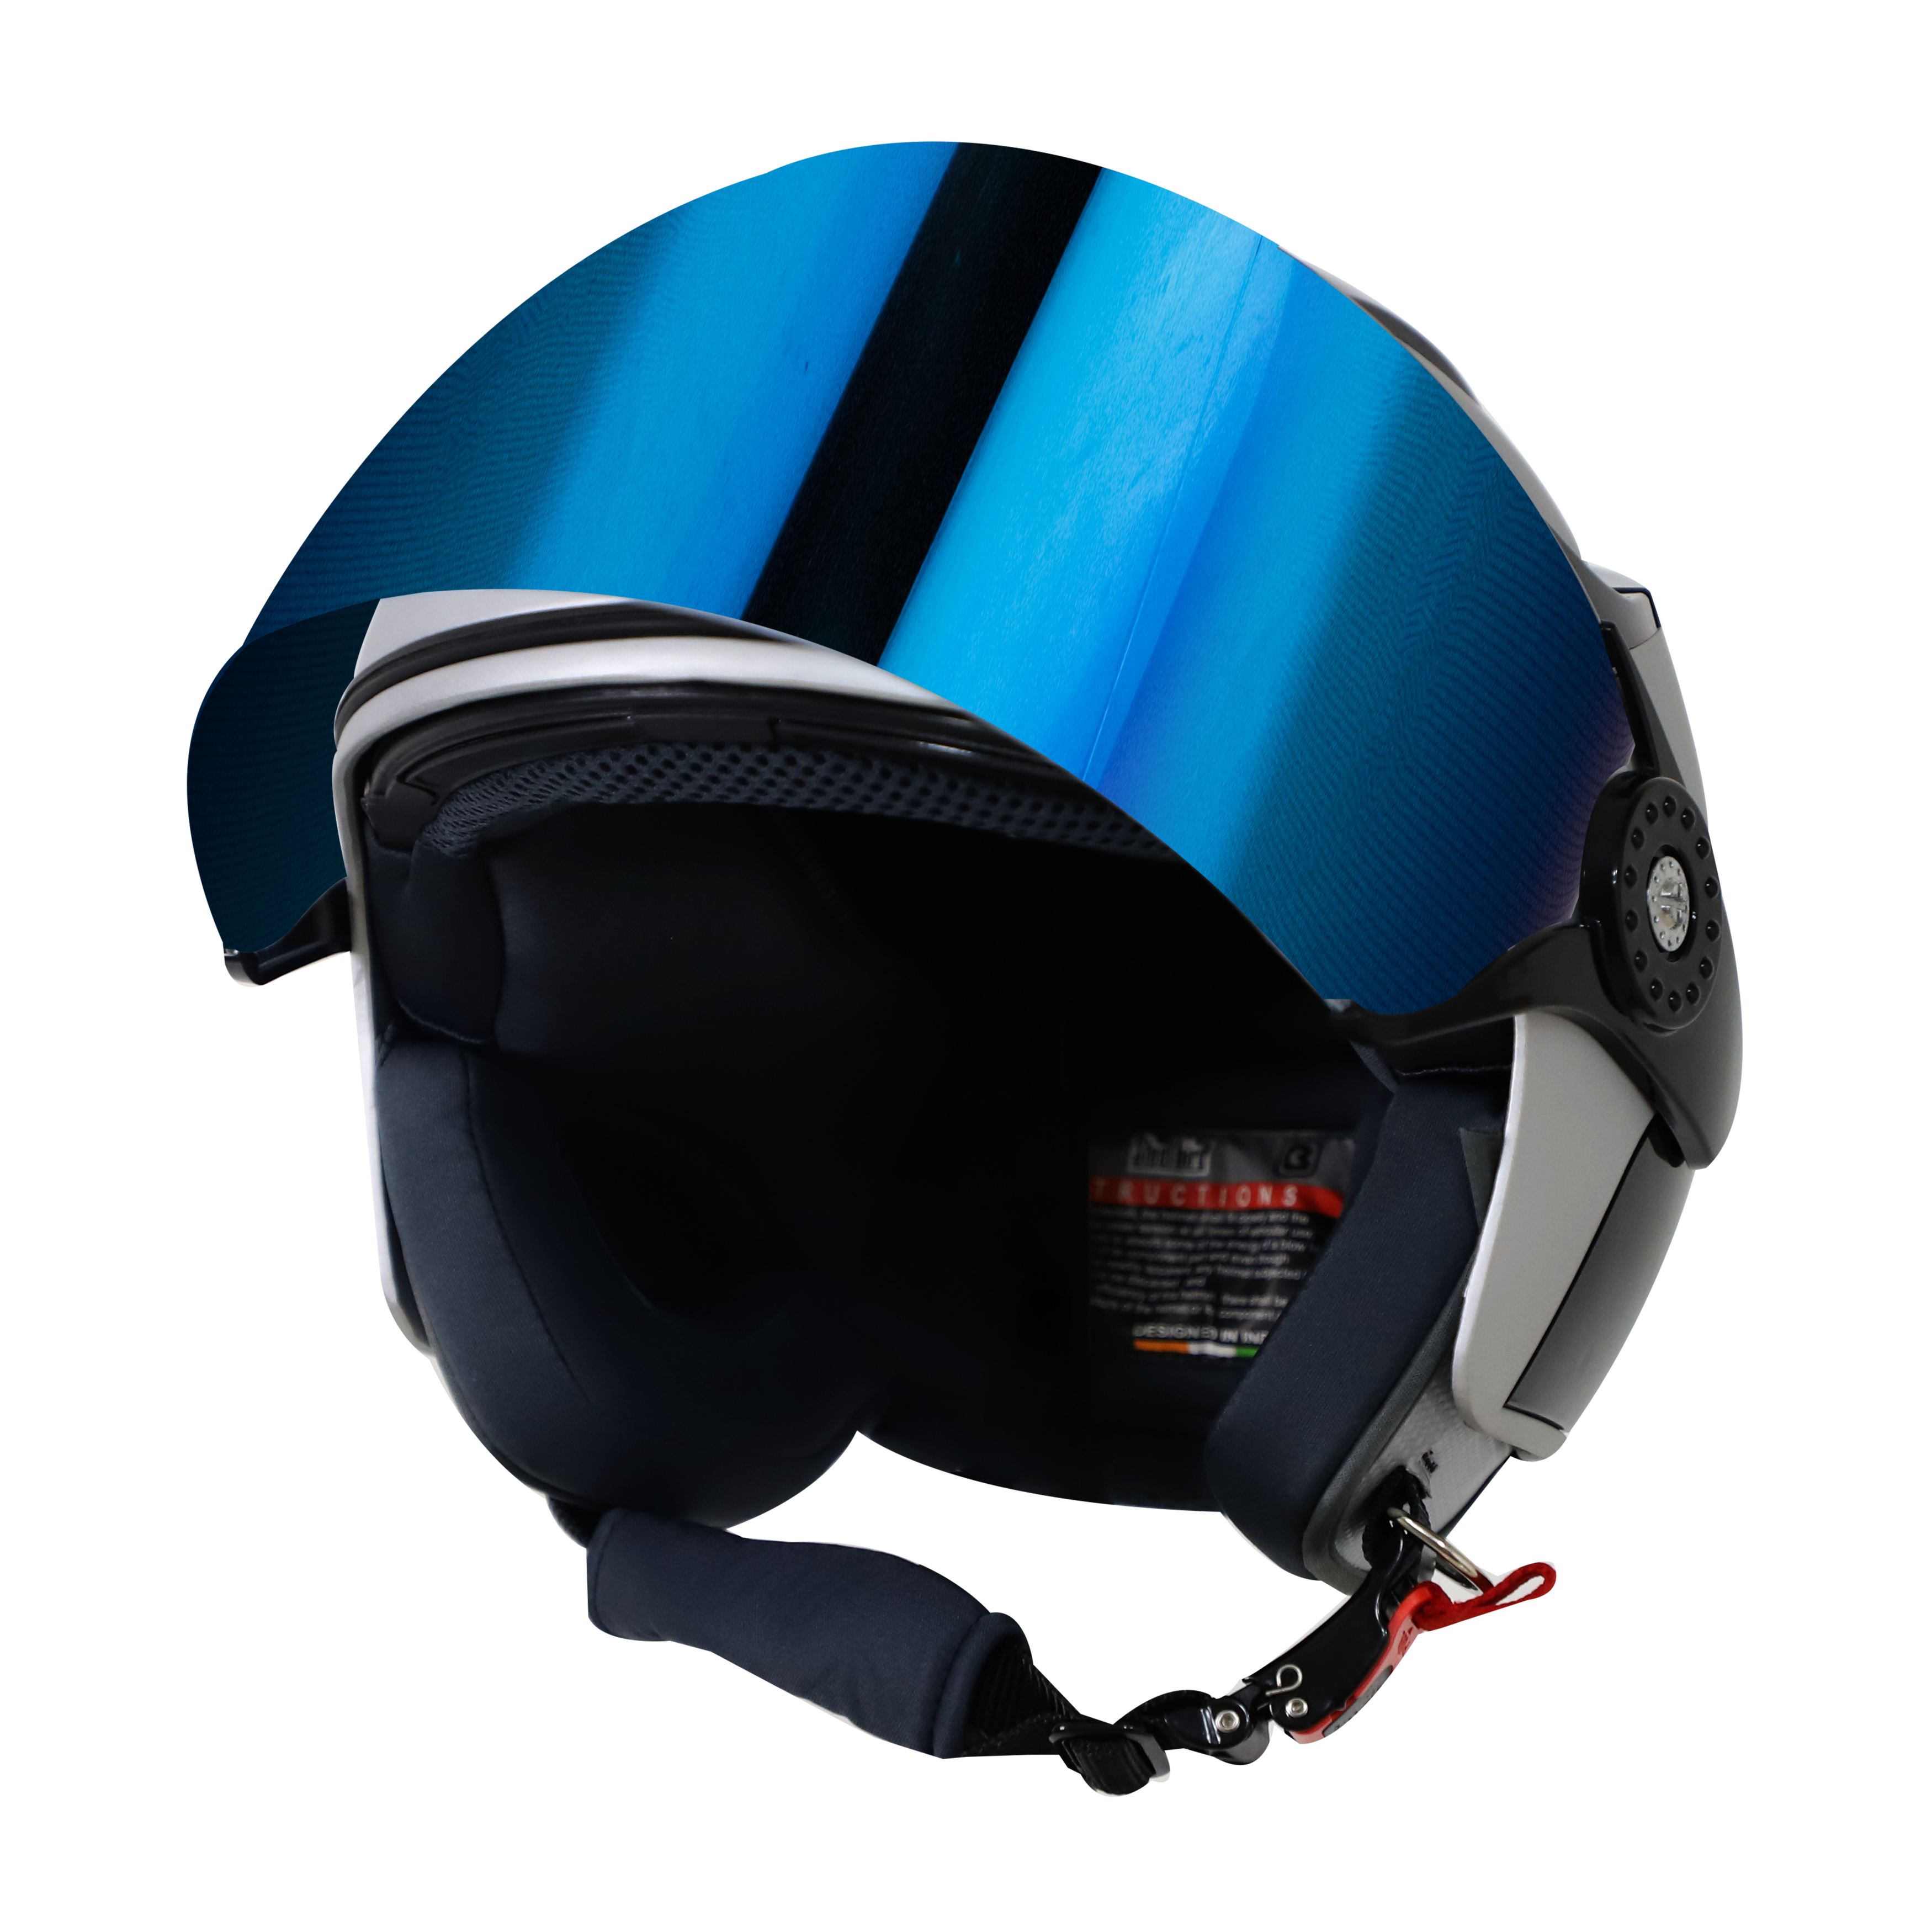 SB-29 AER MAT SILVER WITH BLACK (FITTED WITH CLEAR VISOR WITH EXTRA CHROME BLUE VISOR FREE) 